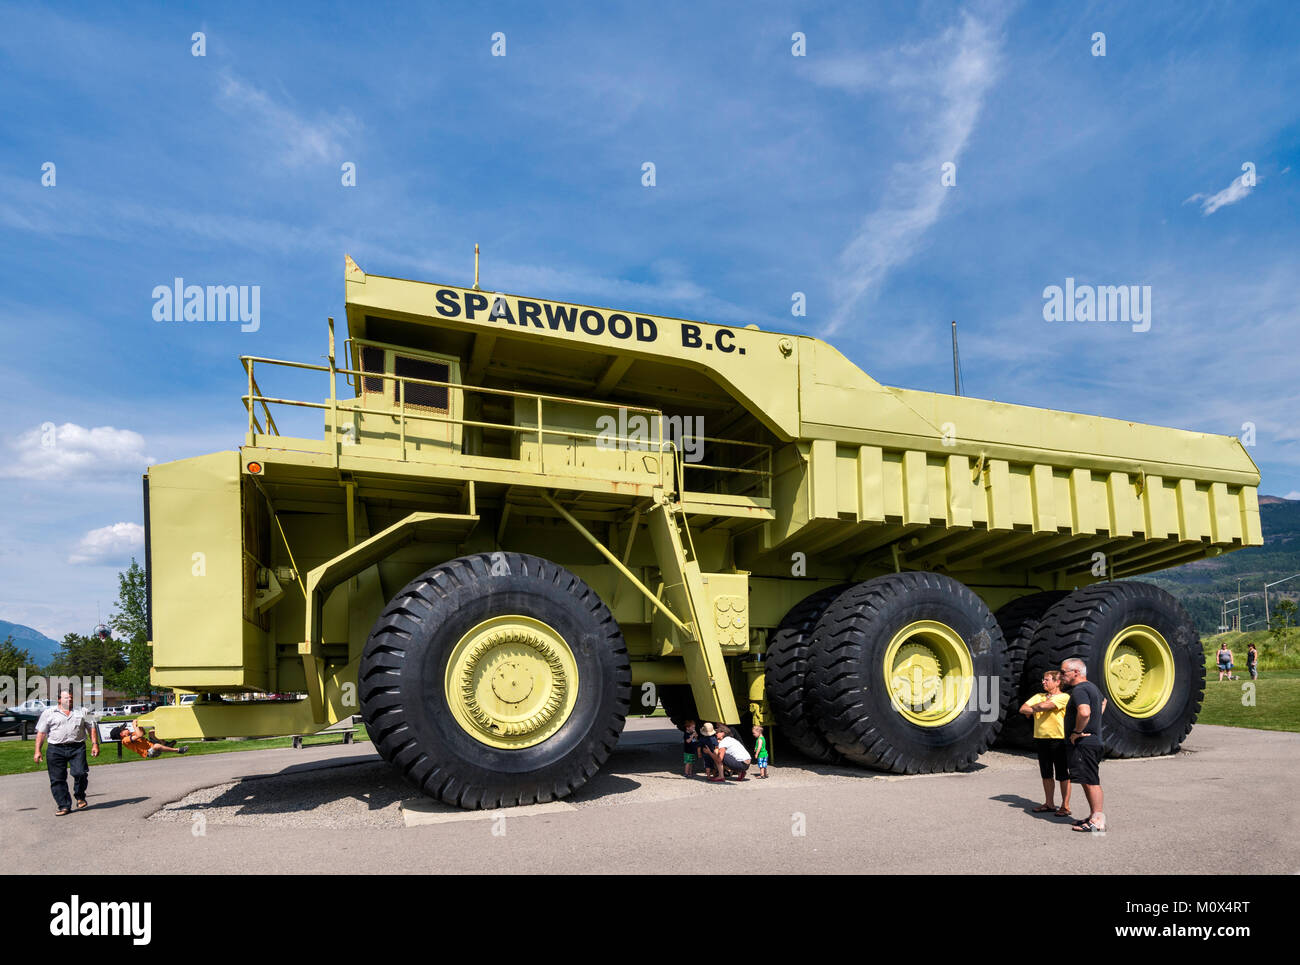 Terex Titan, haul truck for open pit mines, at one time the largest truck in the world, on display in Sparwood, East Kootenay Region, British Columbia Stock Photo